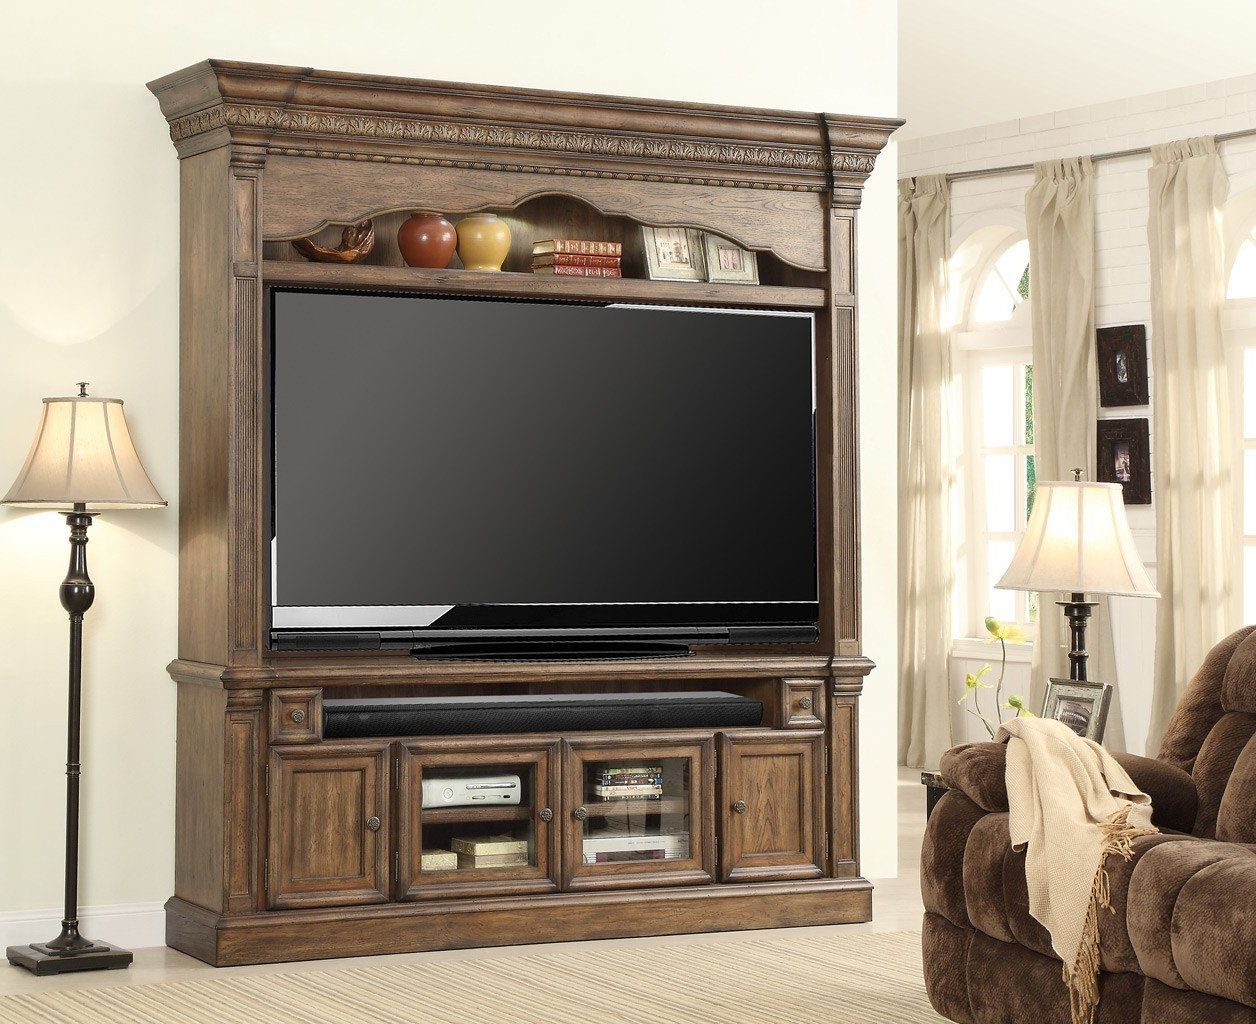 Wide Entertainment Centers For Latest Aria Entertainment Center W/ 80 Inch Console Parker House (View 9 of 15)